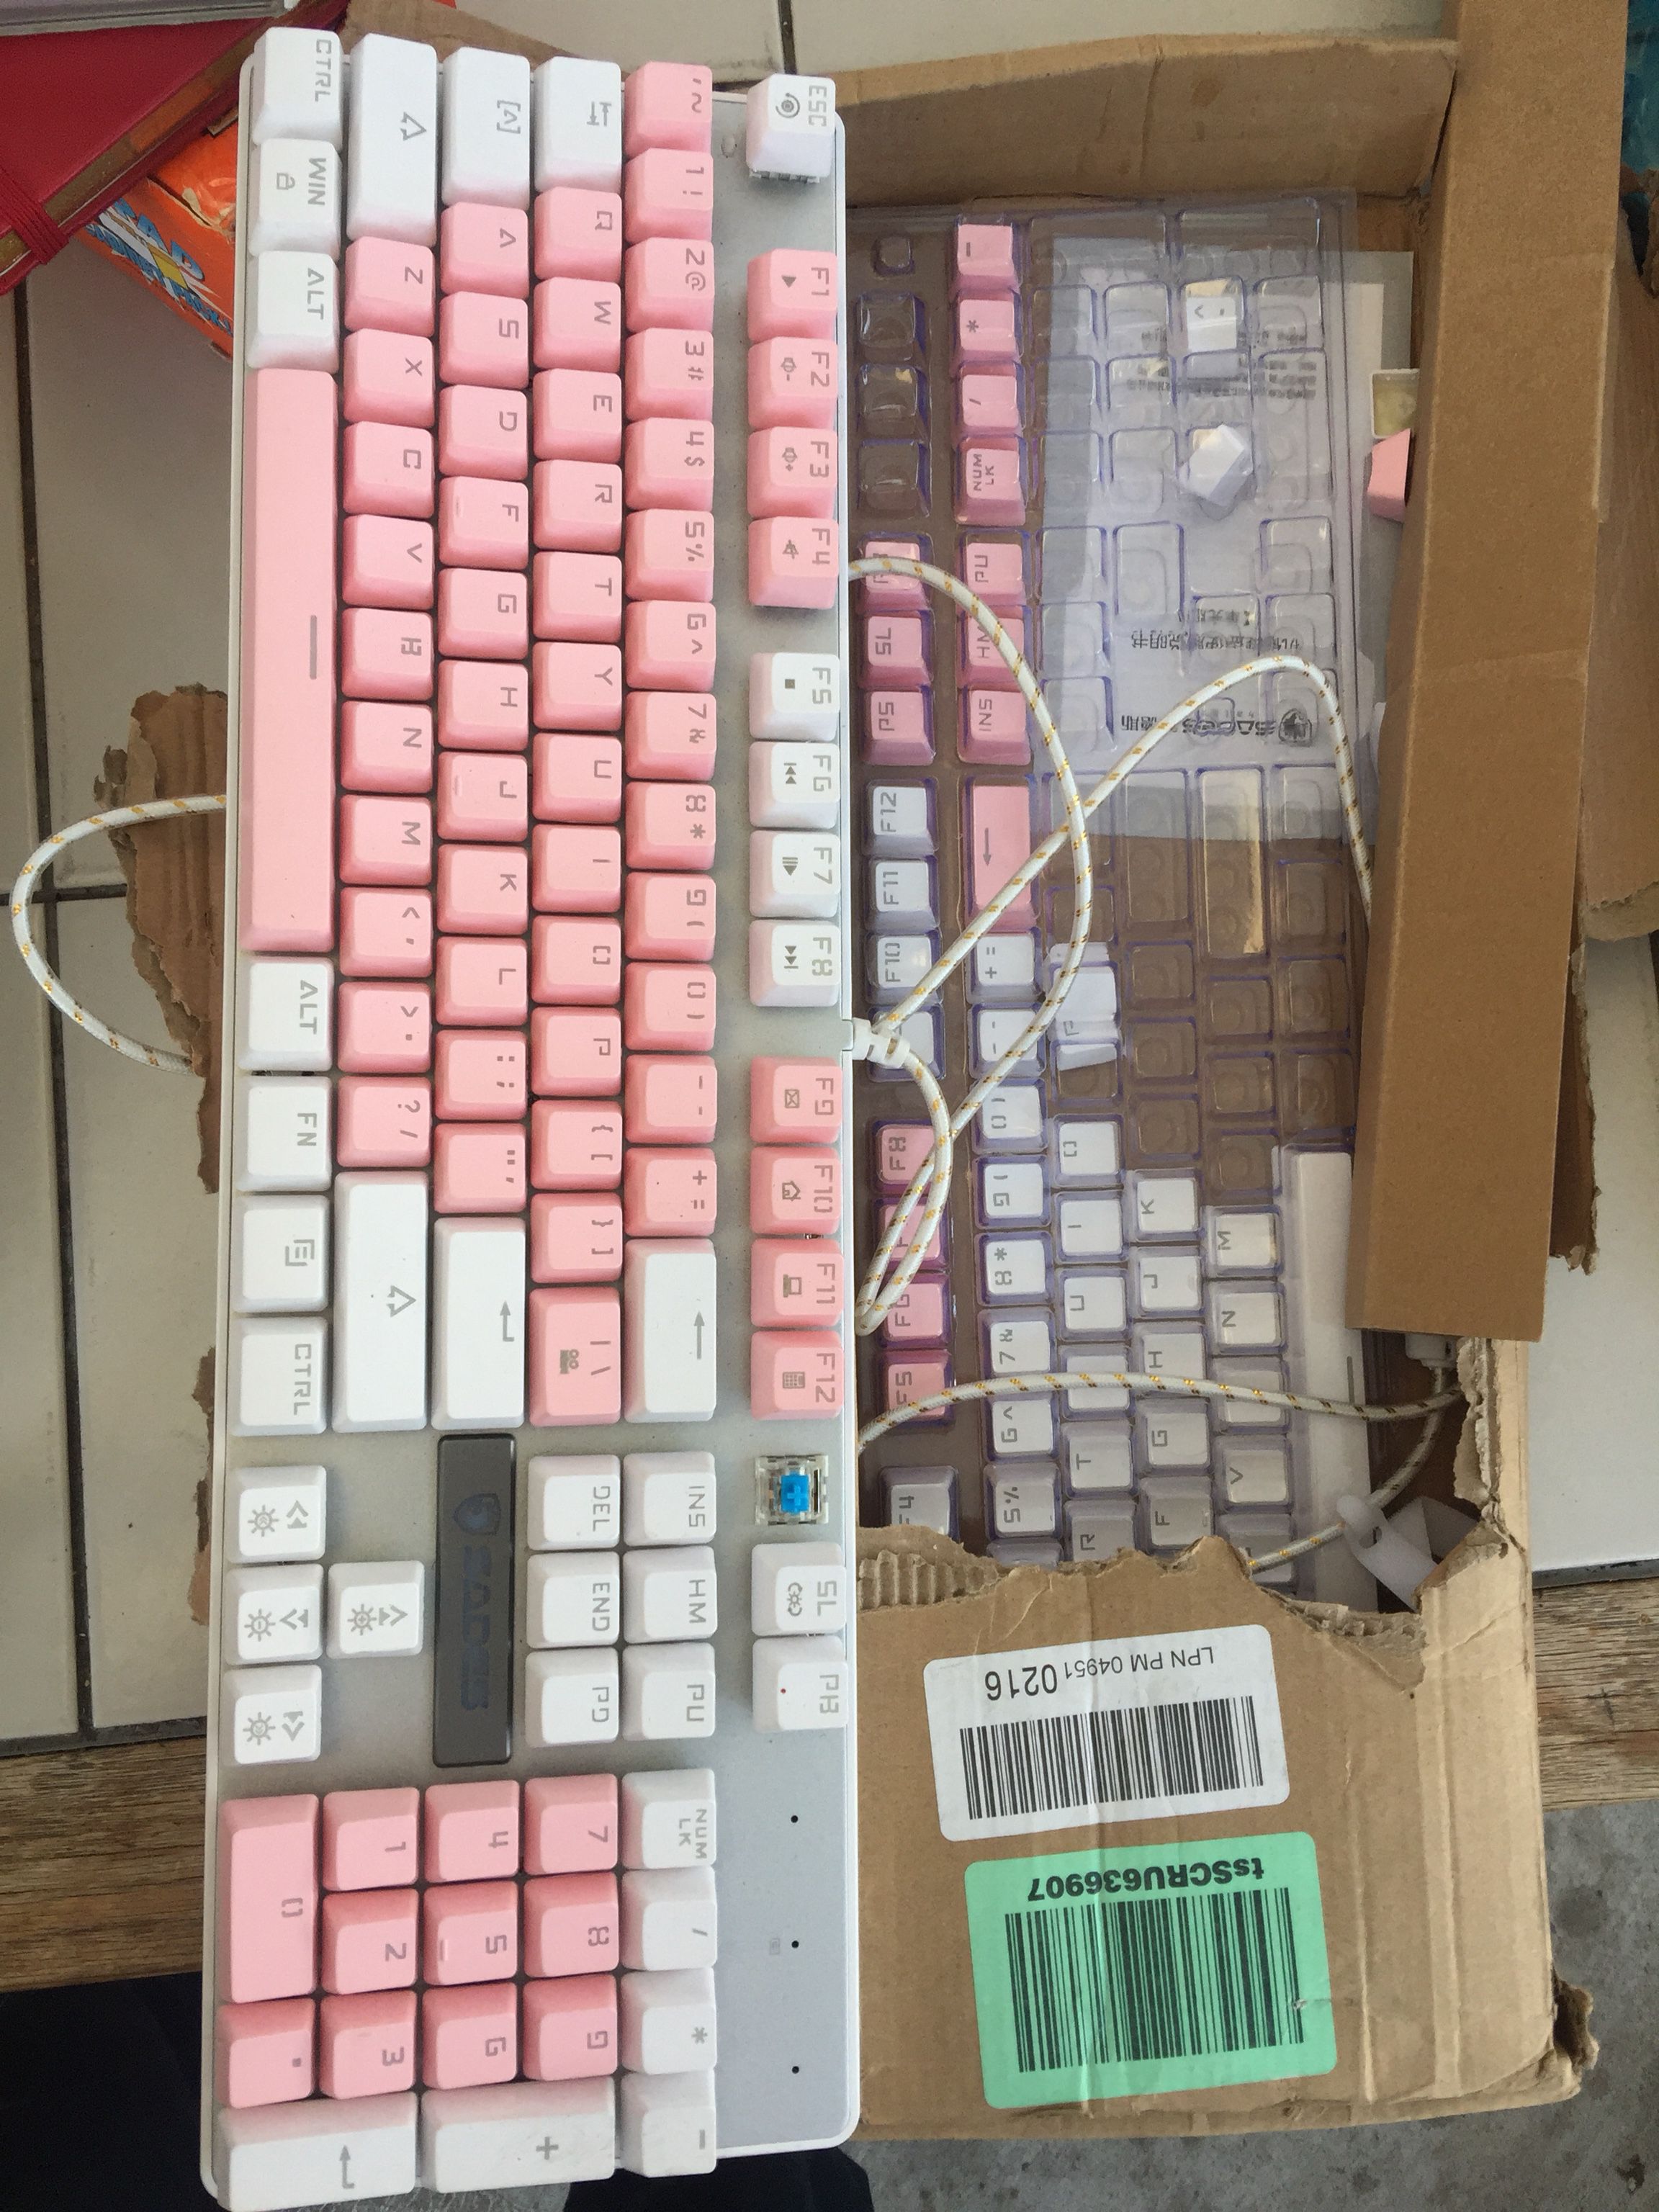 Cute Pink Keyboard With Replacement Parts (key board)